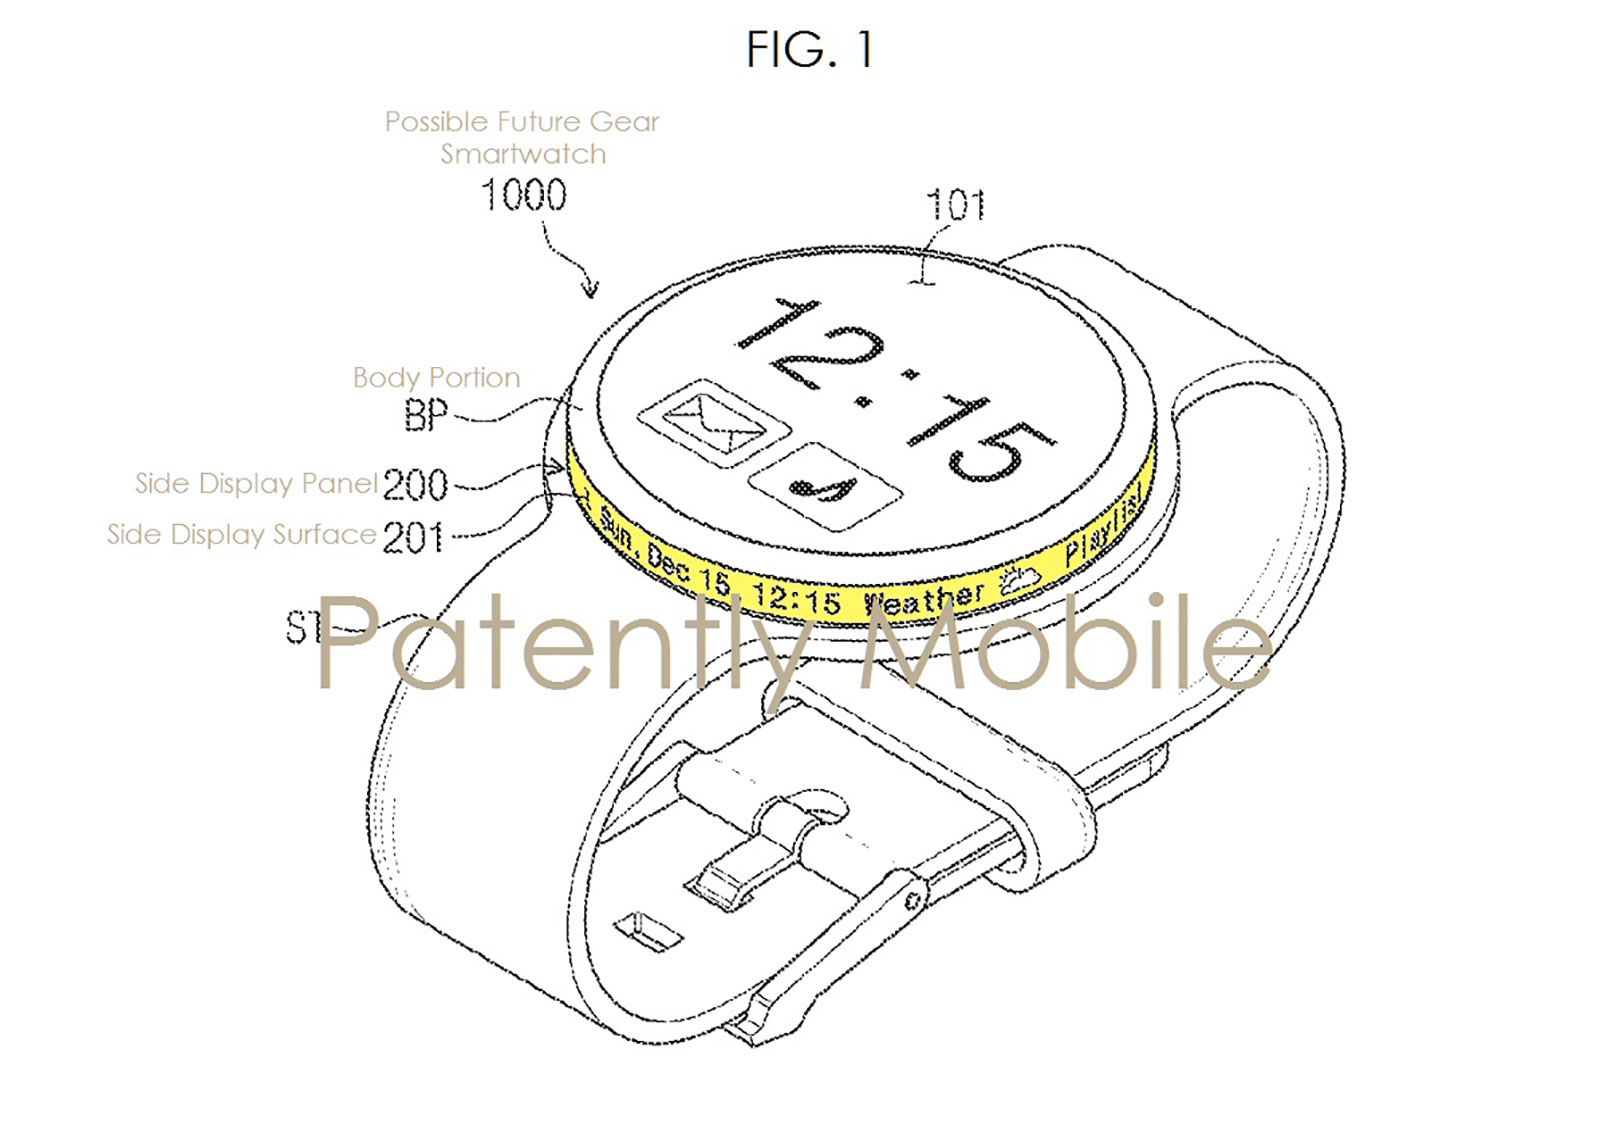 samsung s future smartwatch could have world s first rotary dial flexible display image 1